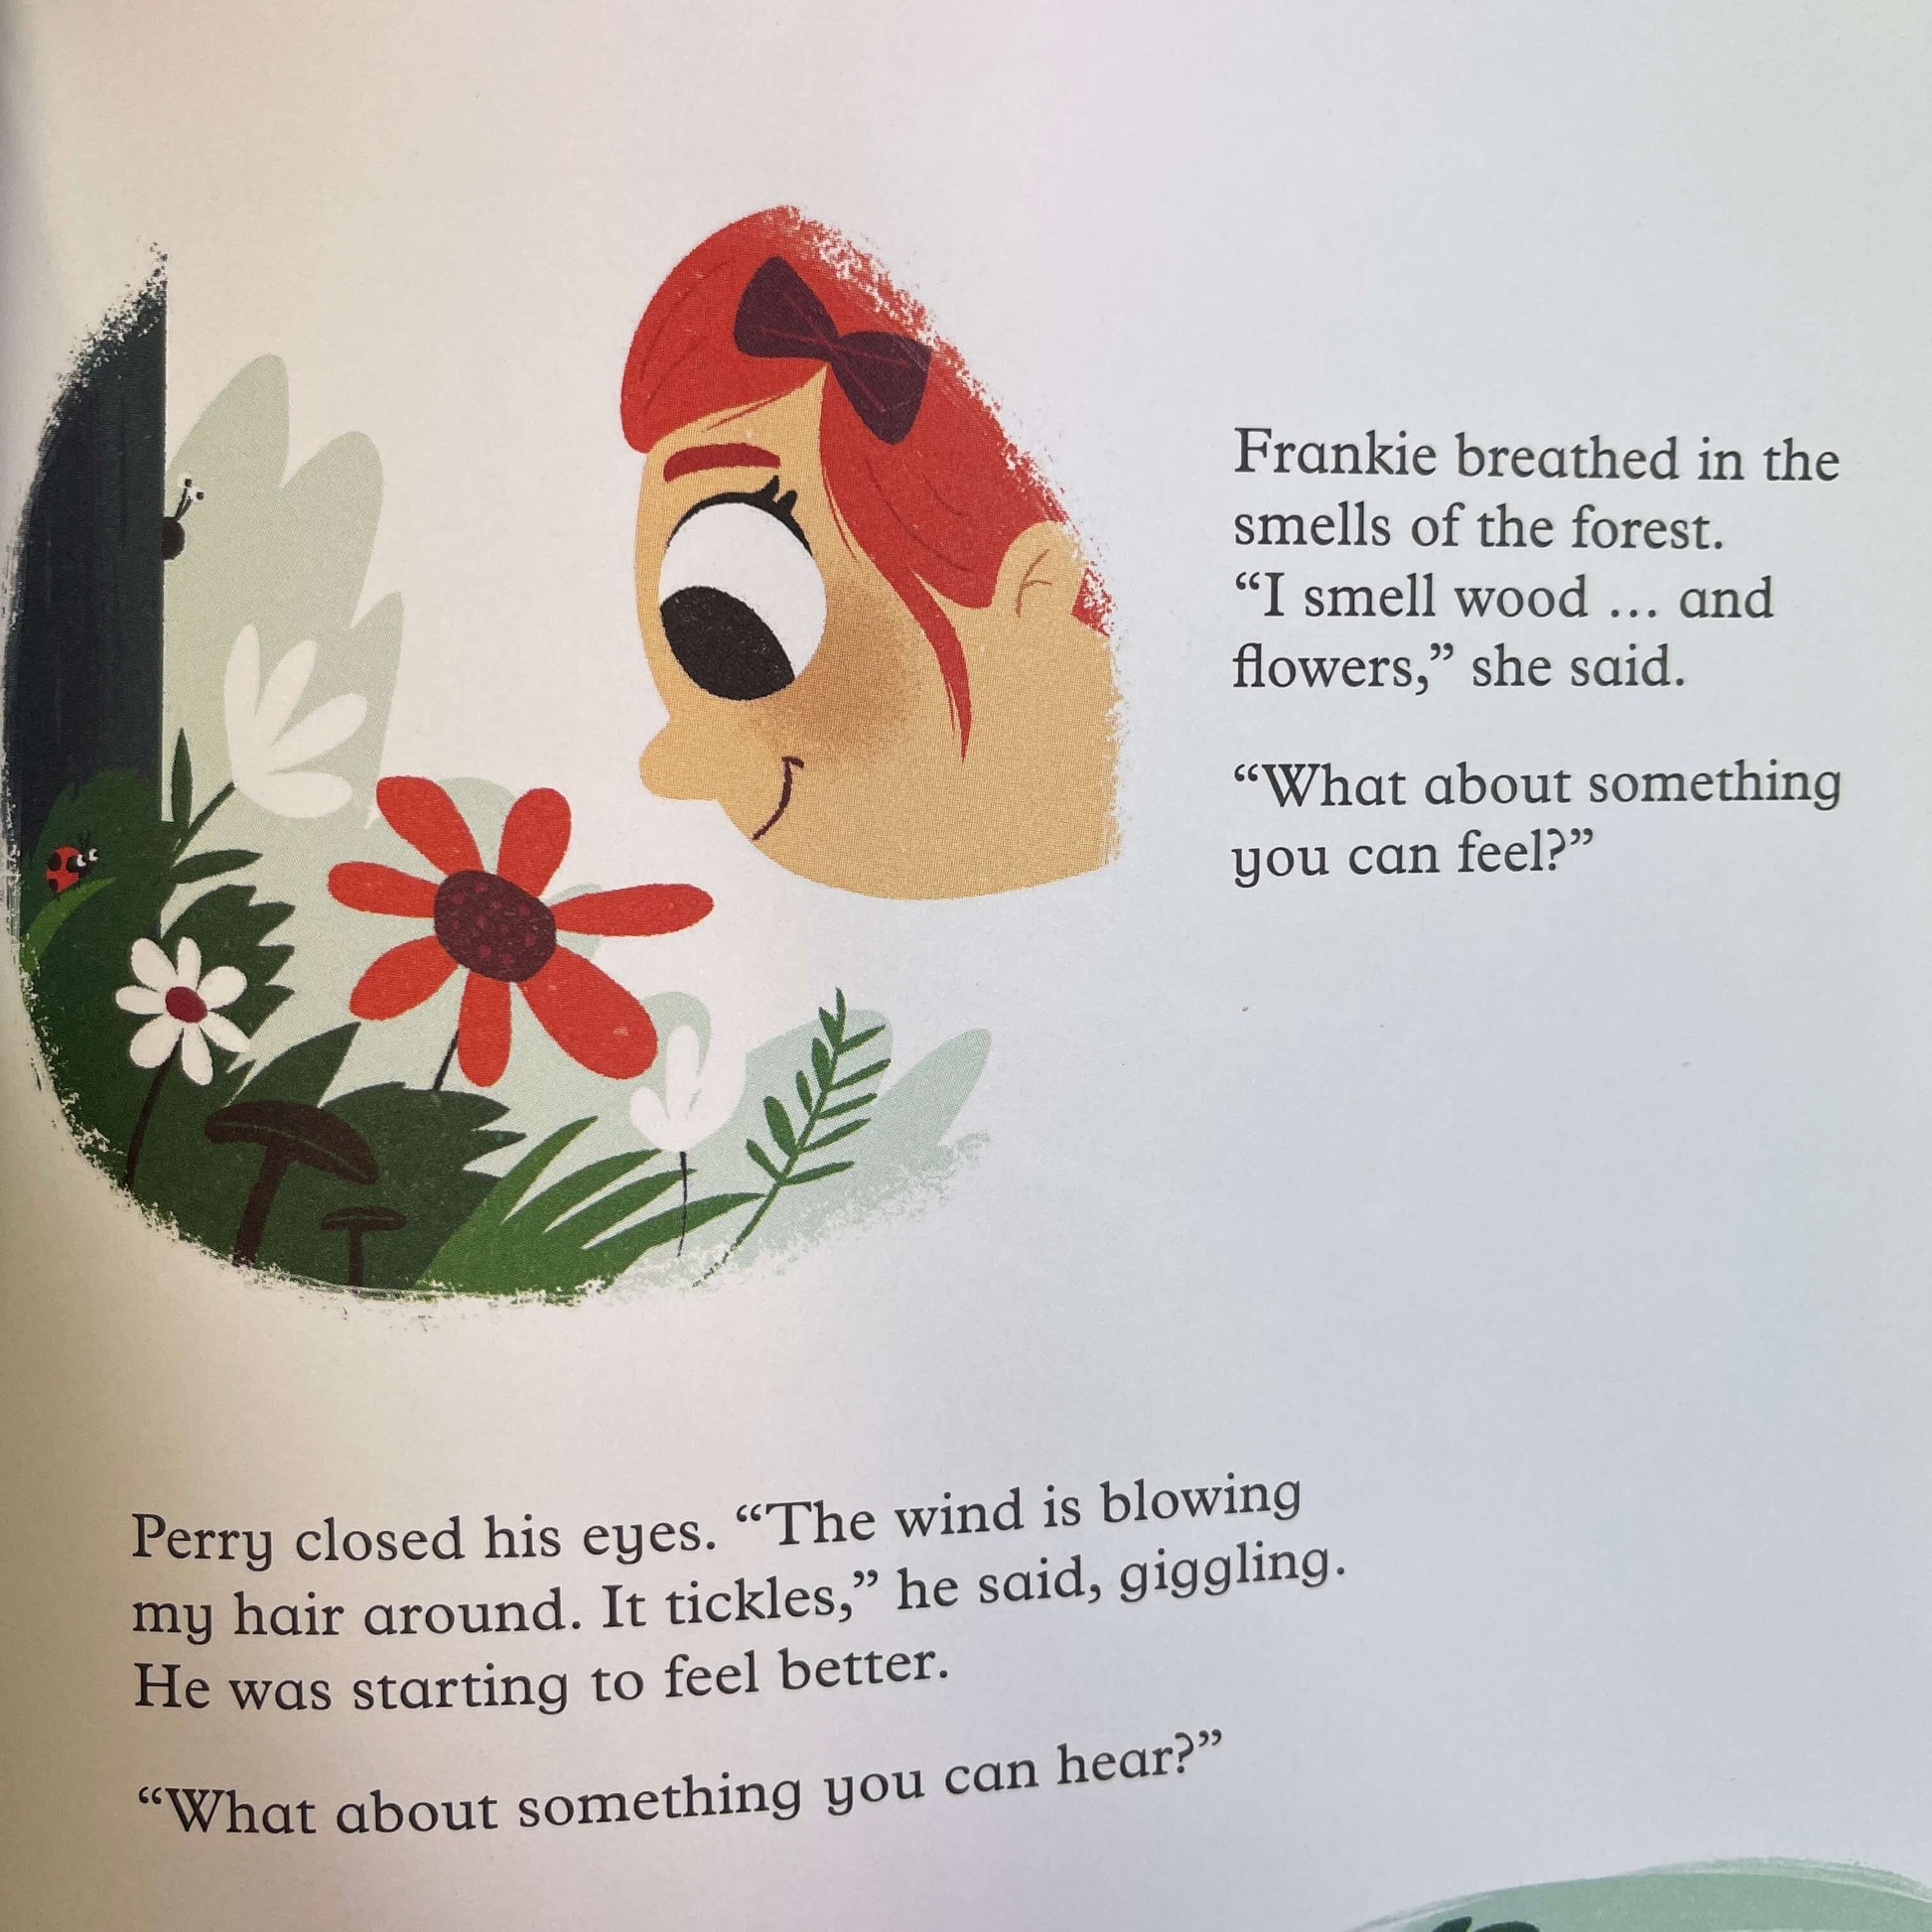 Childrens book "That's Not The Plan".